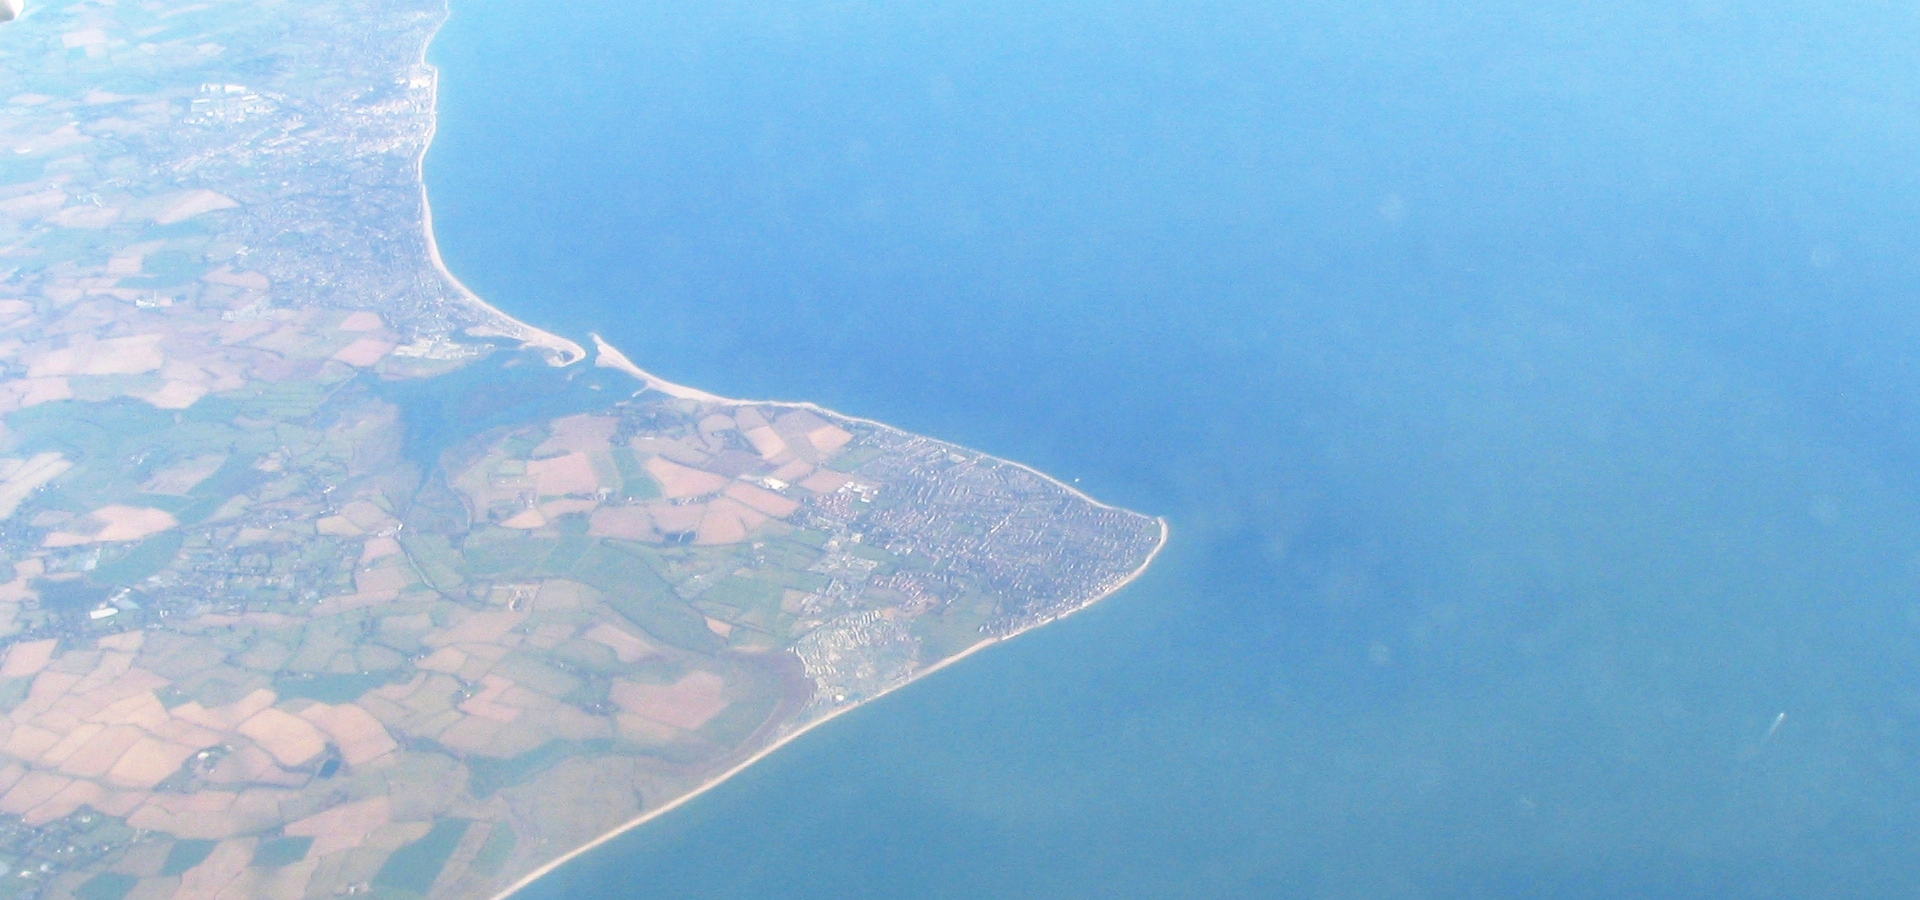 <b>Selsey, West Sussex, England, Great Britain</b>